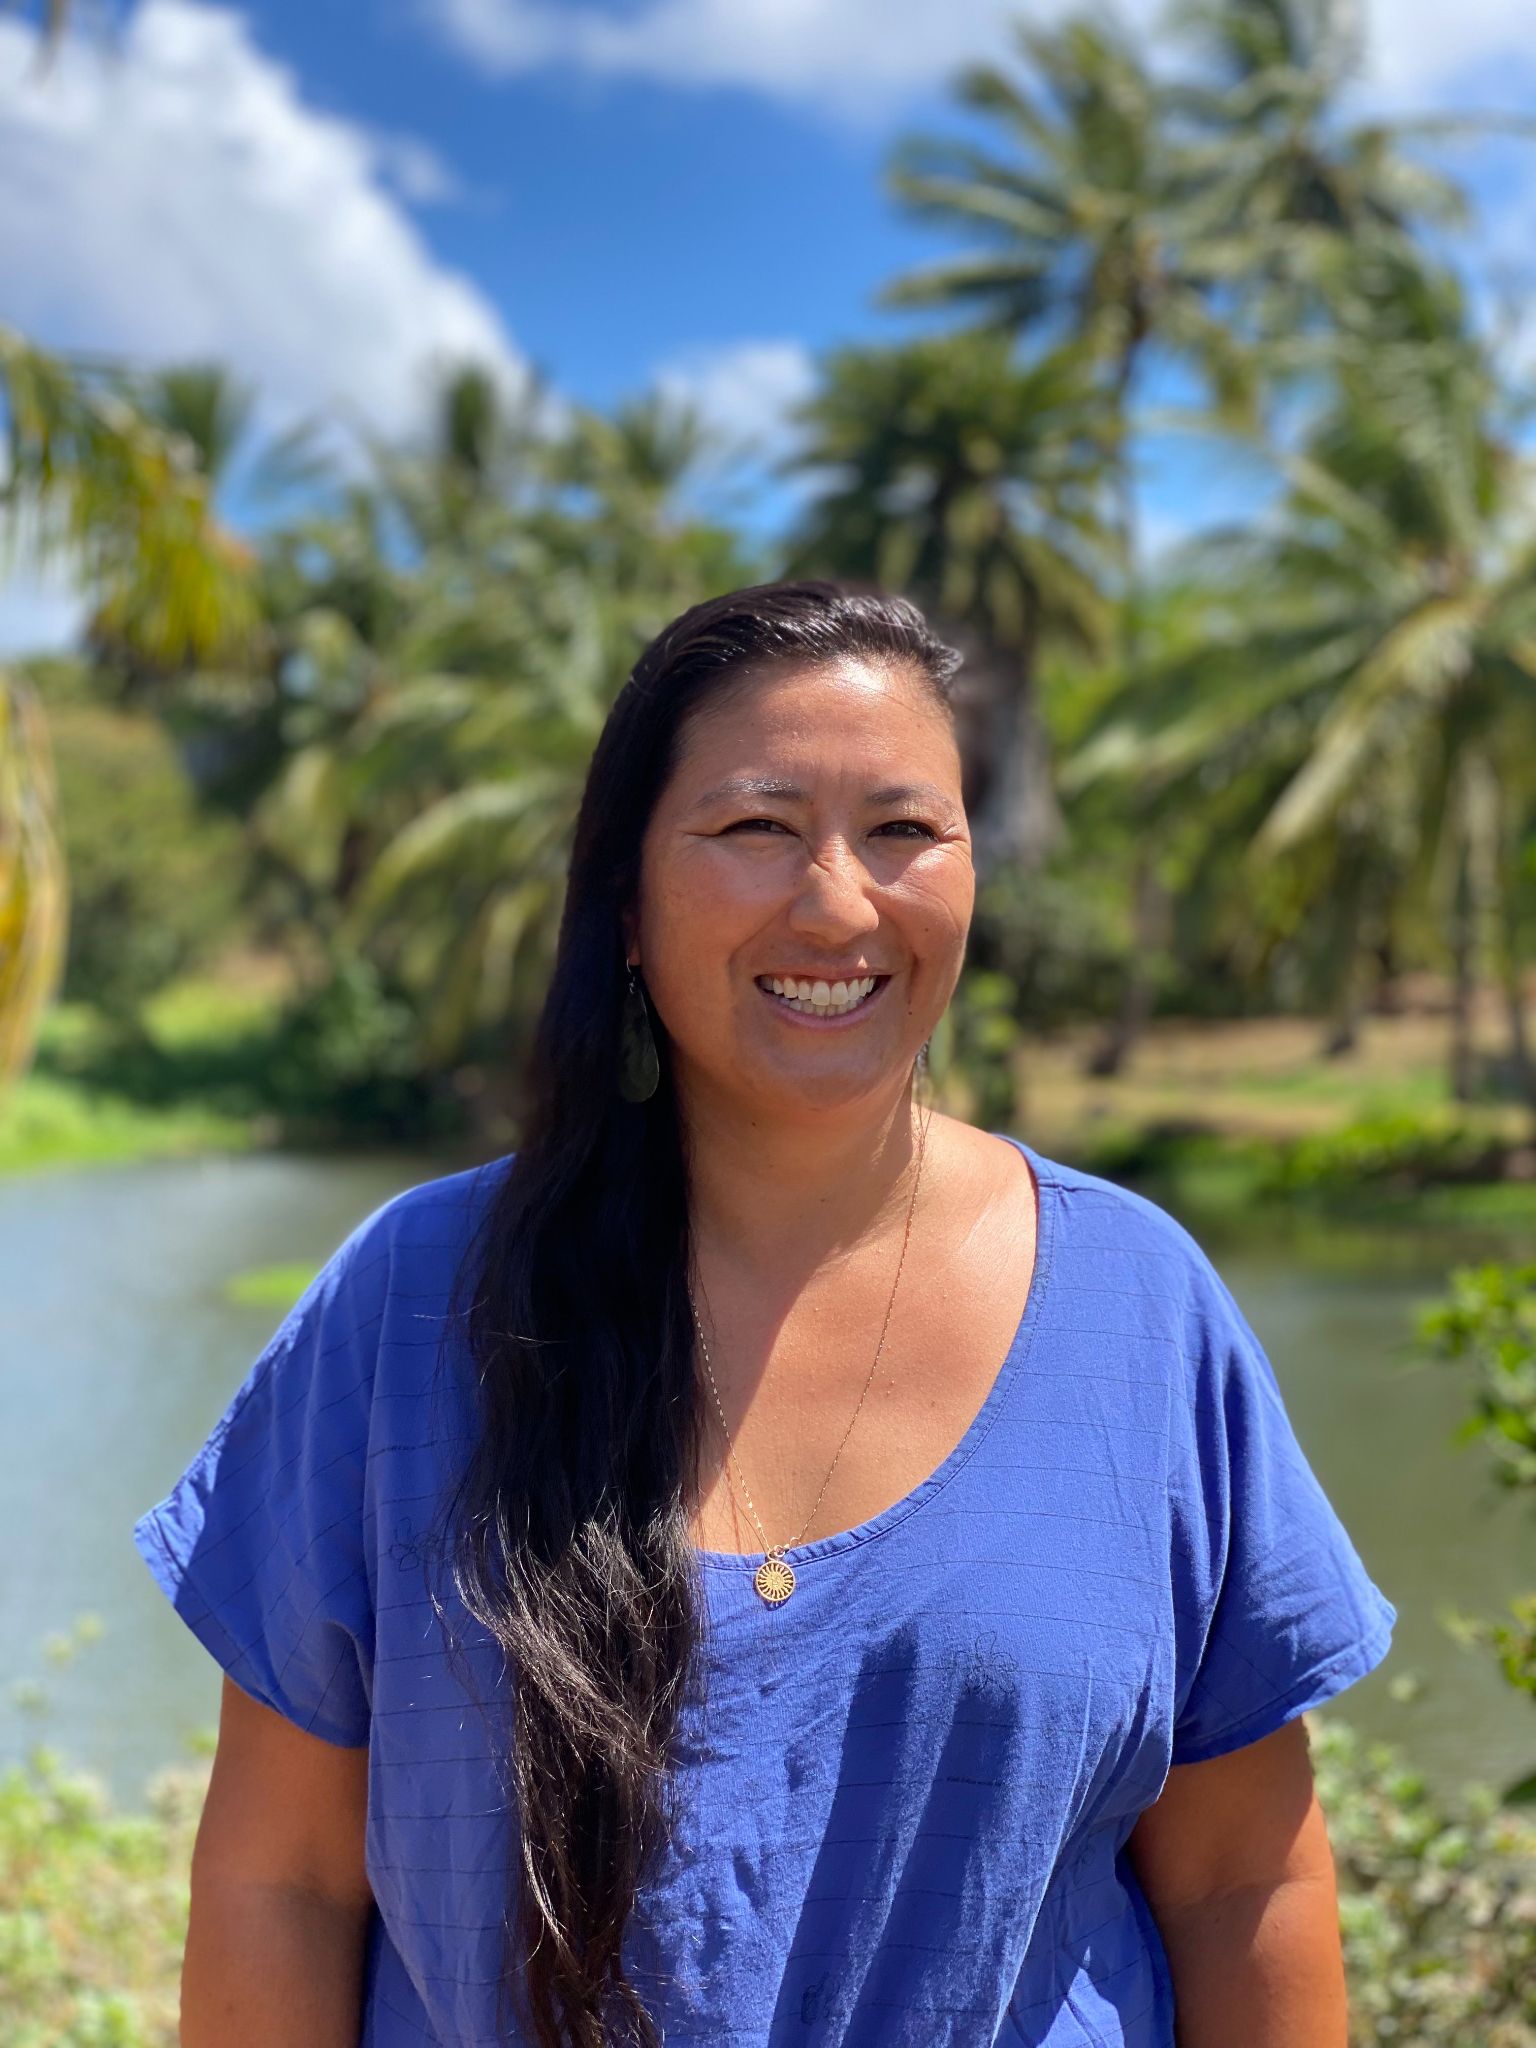 A woman with long, dark hair in a blue shirt smiles at the camera in front of a pond and palm trees.